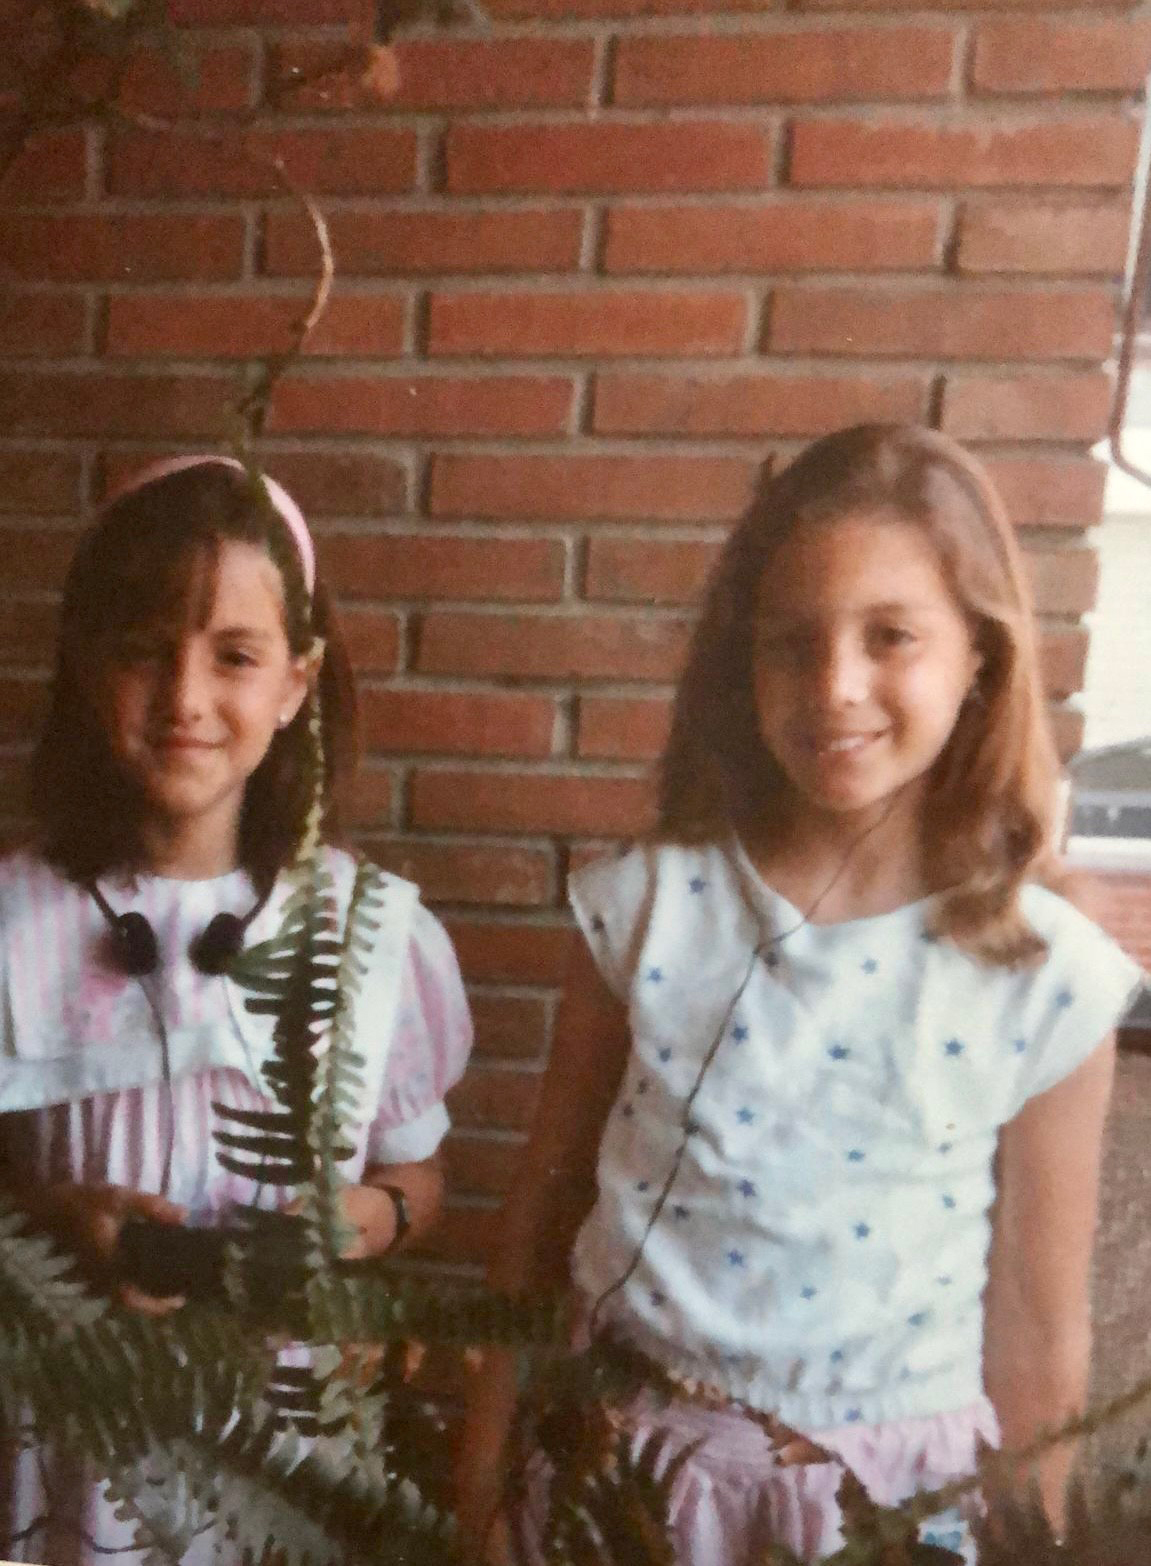 Susana (left) and her sister.  As a child, I listened to music and stories told with a walkman